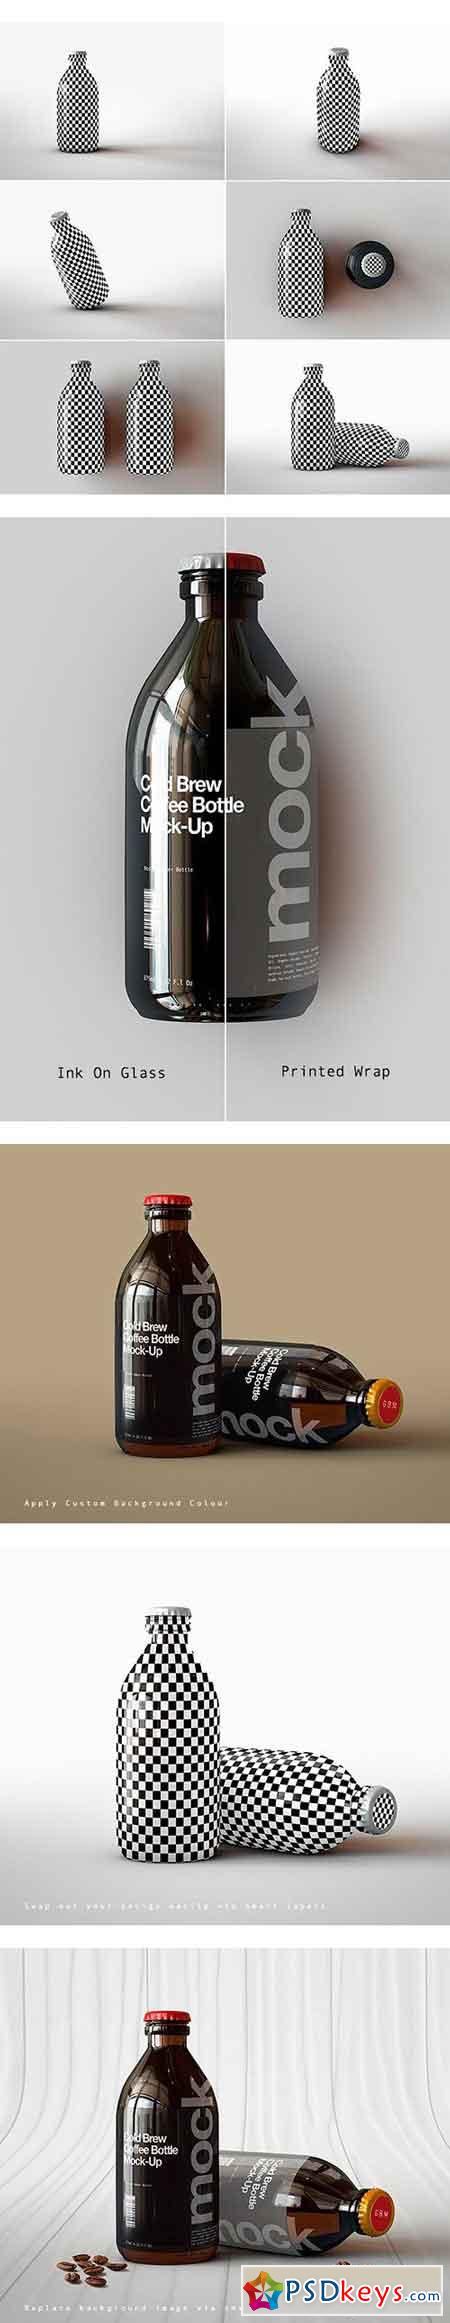 Download Cold Brew Coffee Bottle Mock Up 1695956 Free Download Photoshop Vector Stock Image Via Torrent Zippyshare From Psdkeys Com